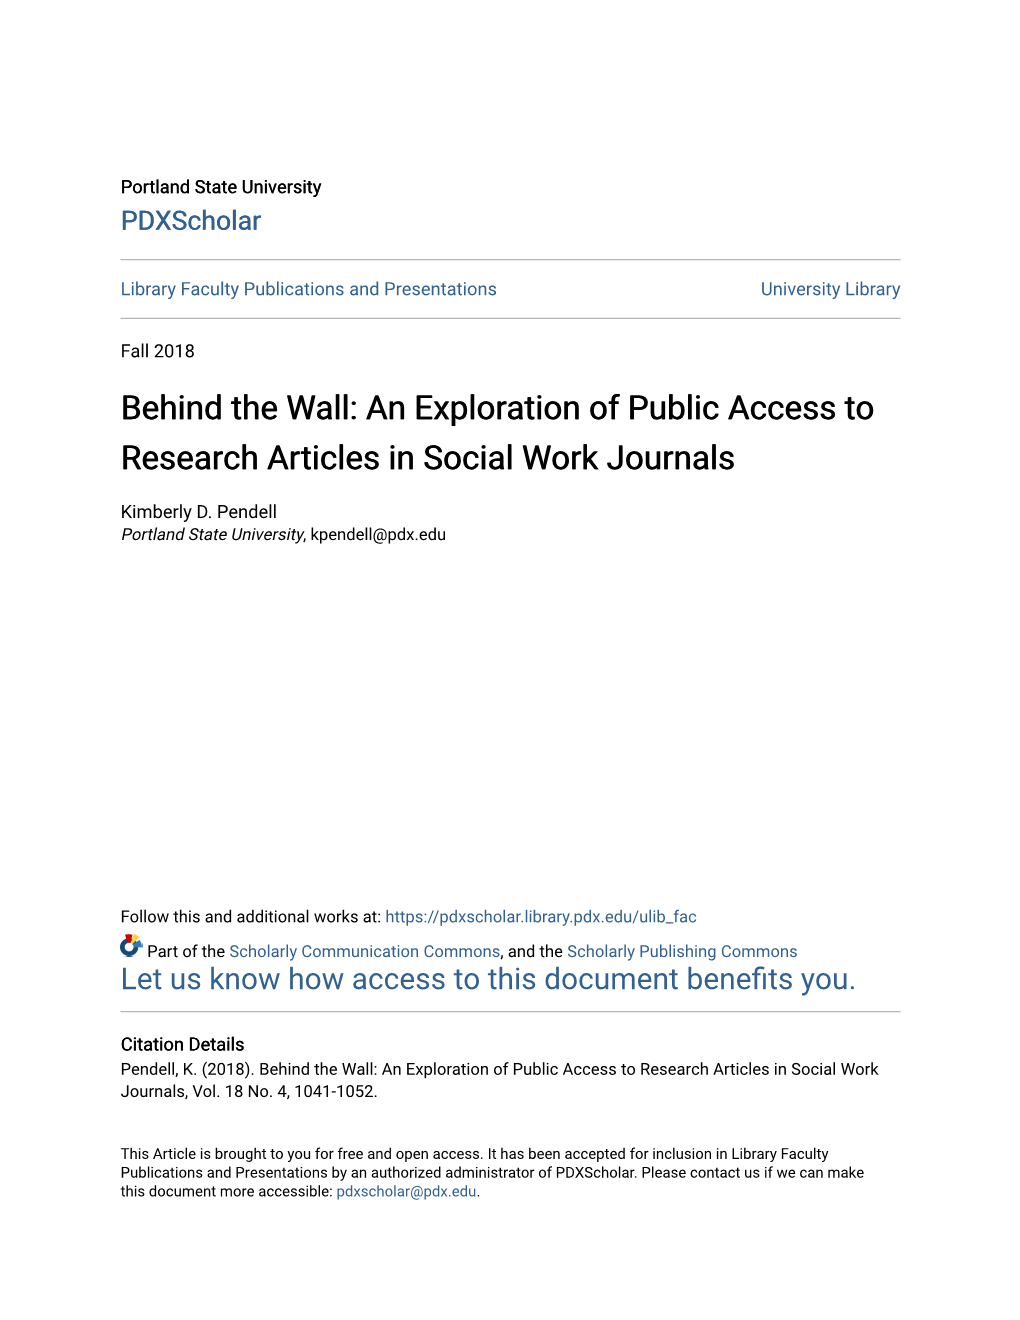 An Exploration of Public Access to Research Articles in Social Work Journals